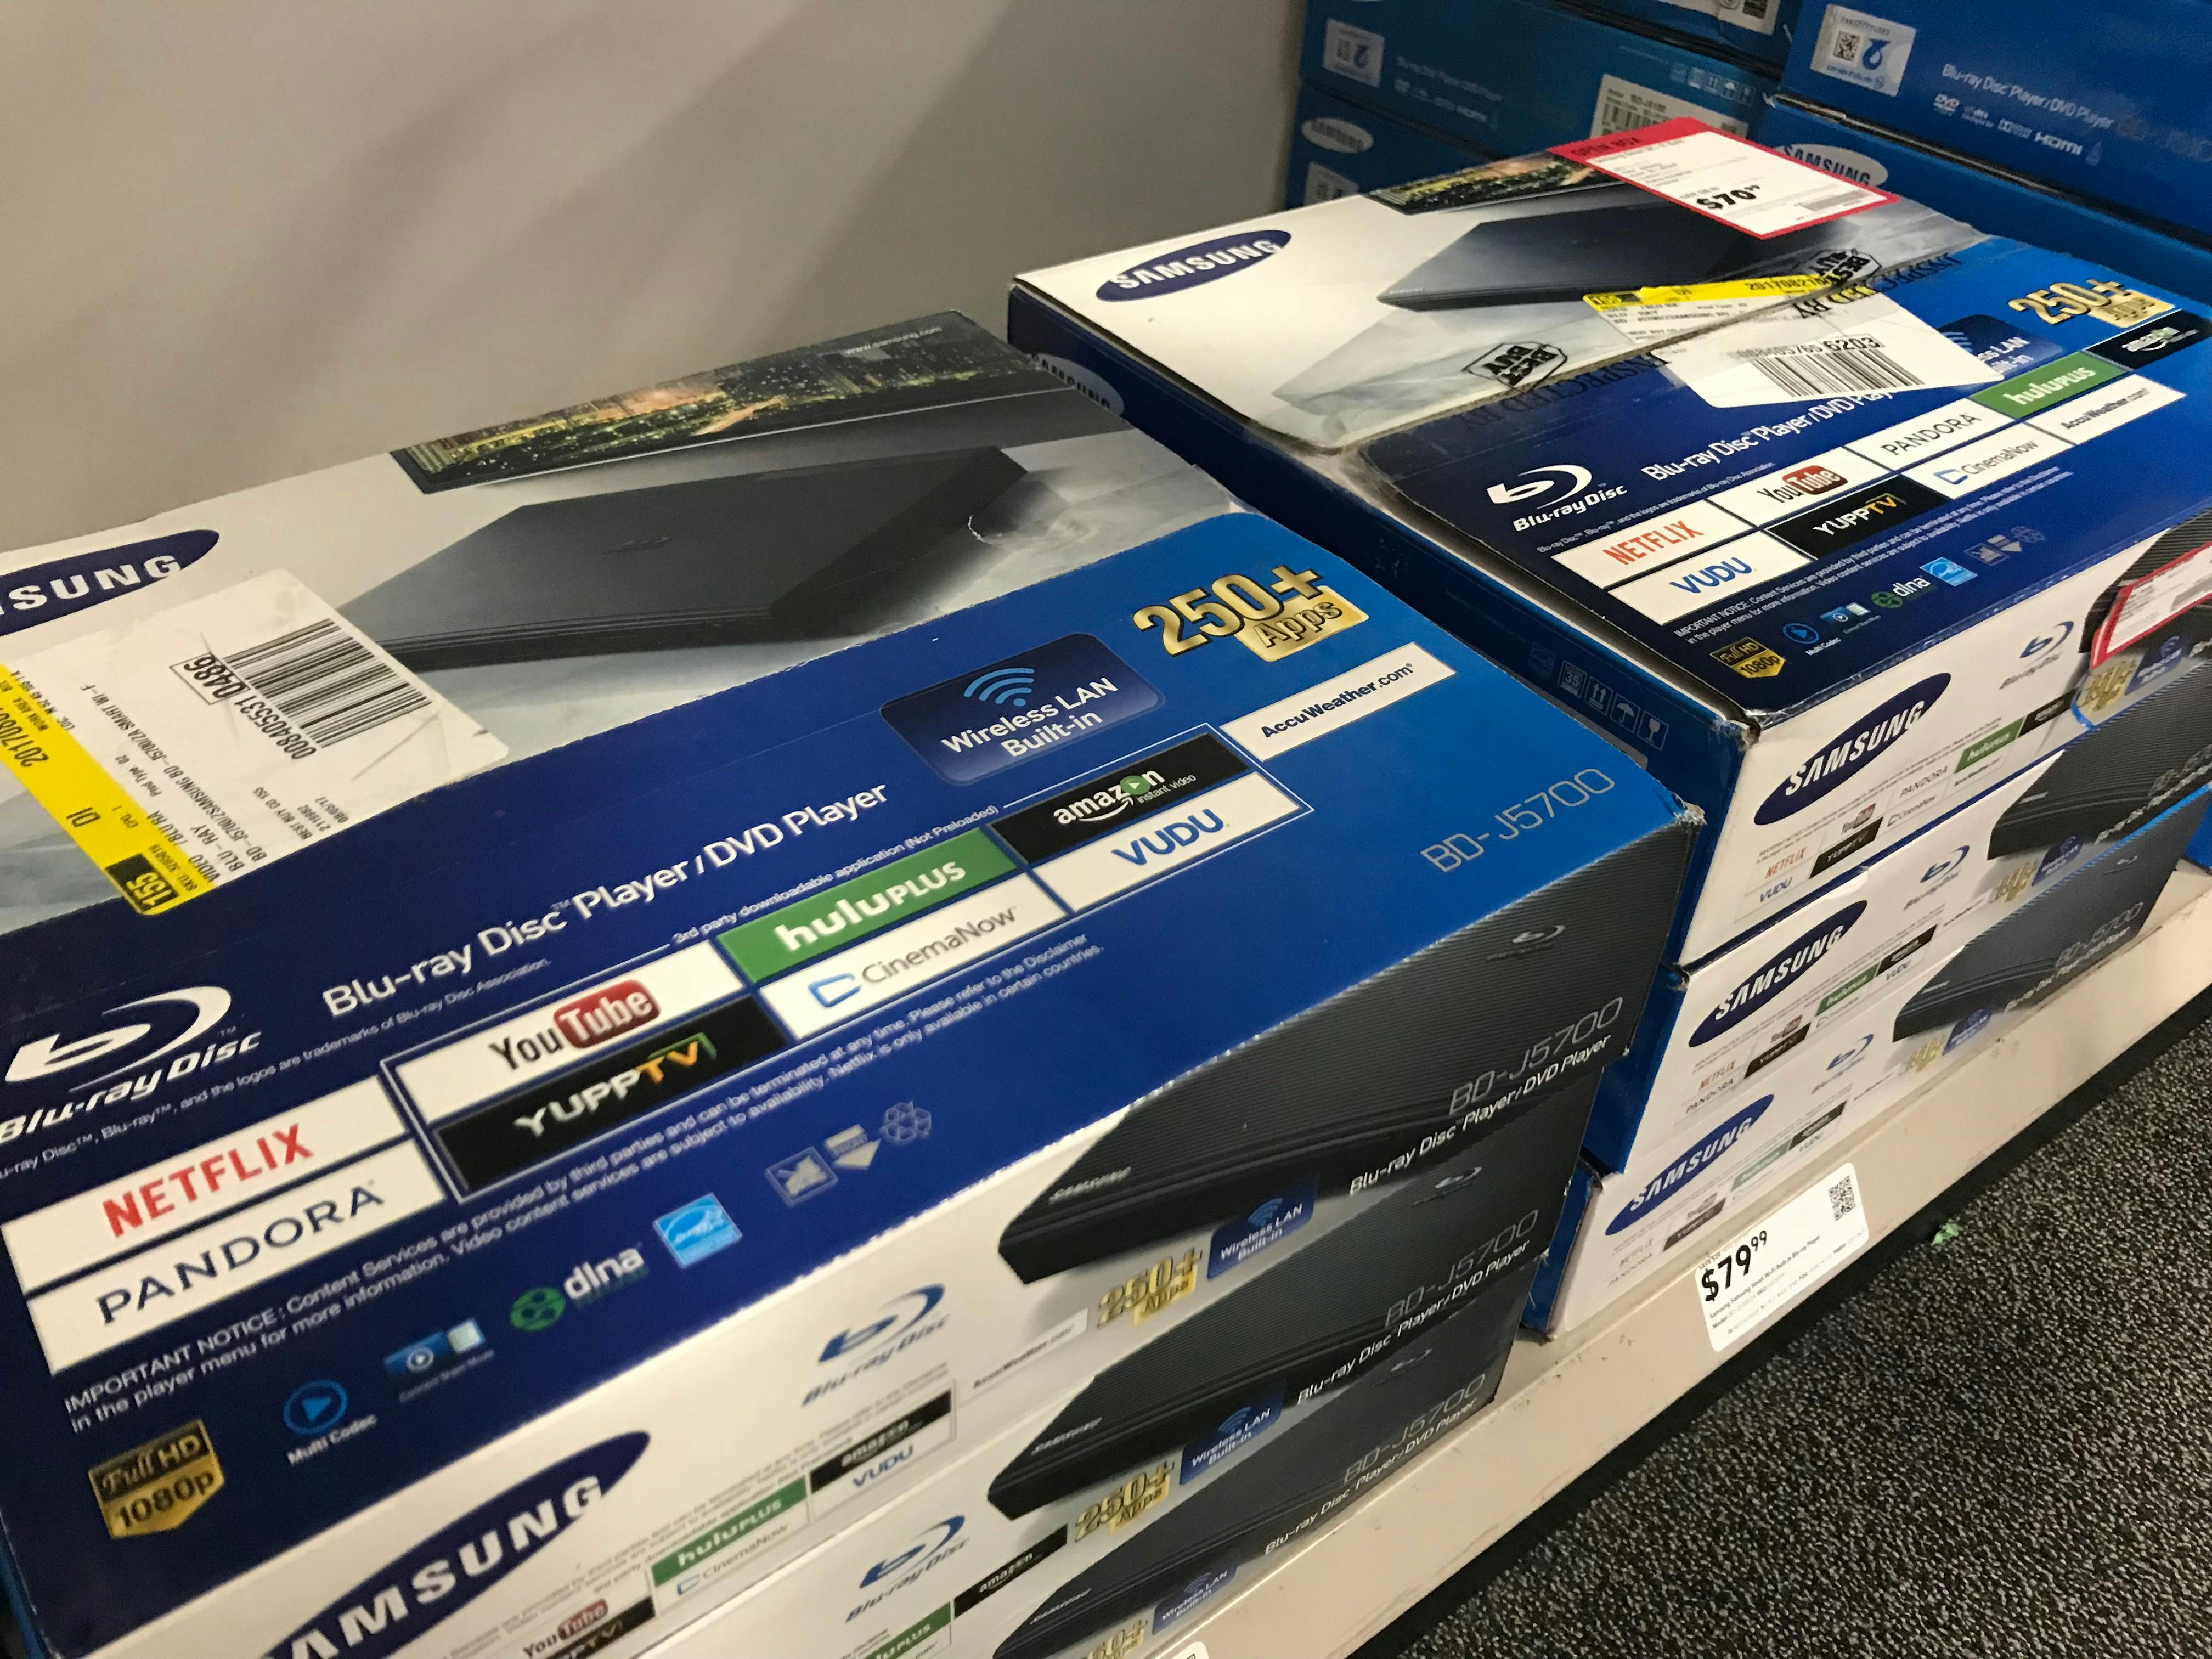 Samsung Streaming Blu Ray Player Only 47 99 At Best Buy The Krazy Coupon Lady